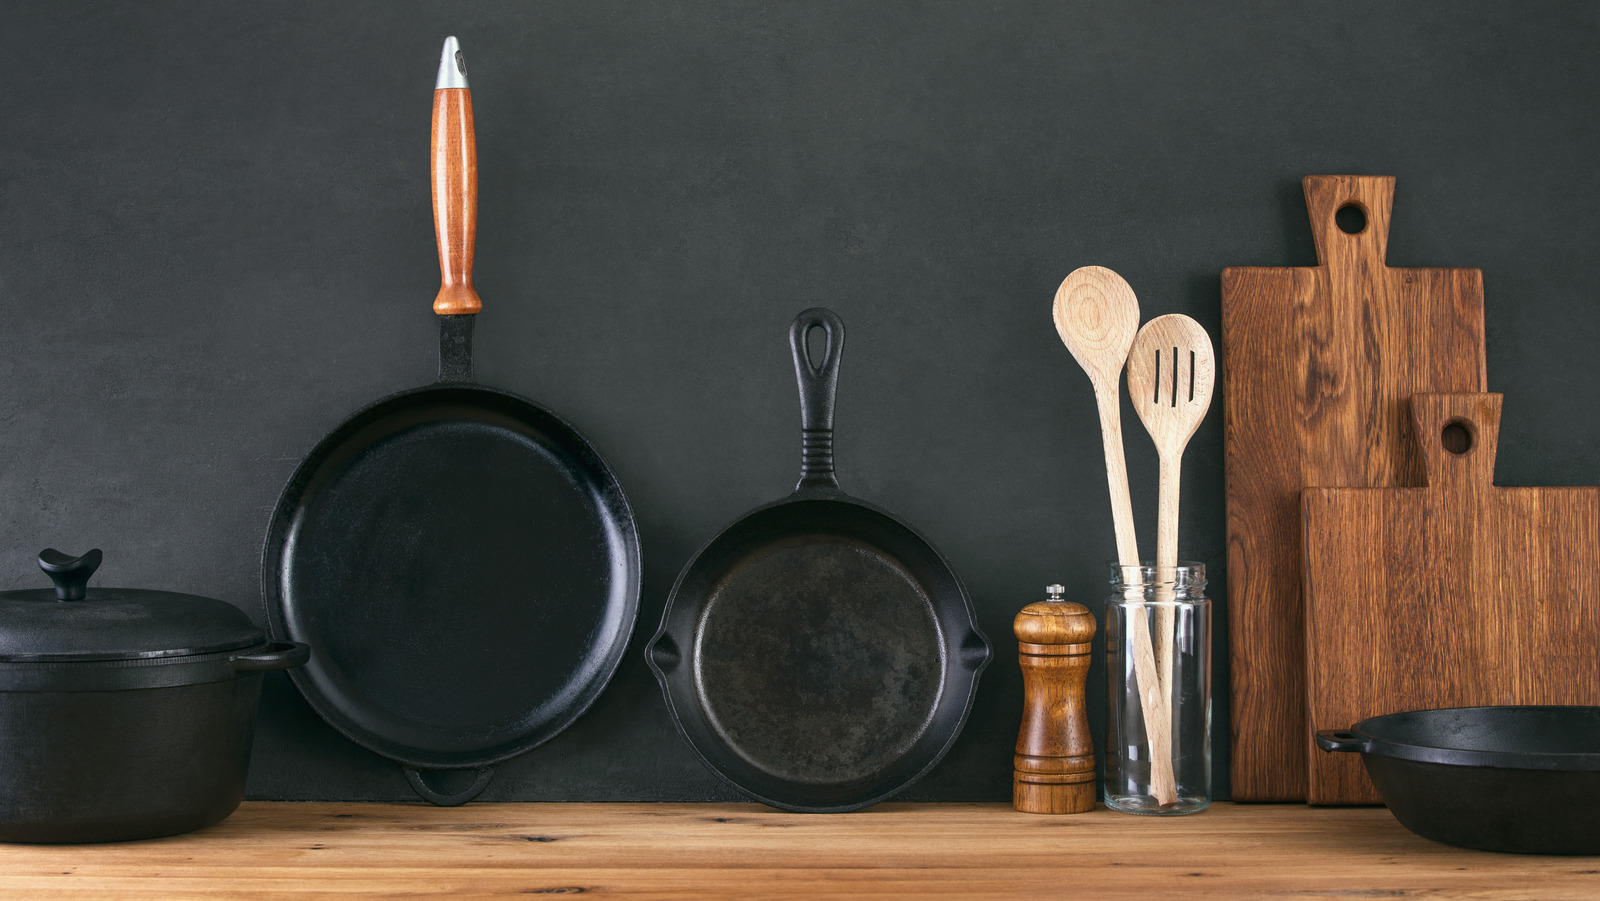 https://www.tastingtable.com/img/gallery/why-you-might-want-to-avoid-cast-iron-skillets-with-a-wooden-handle/l-intro-1651091681.jpg